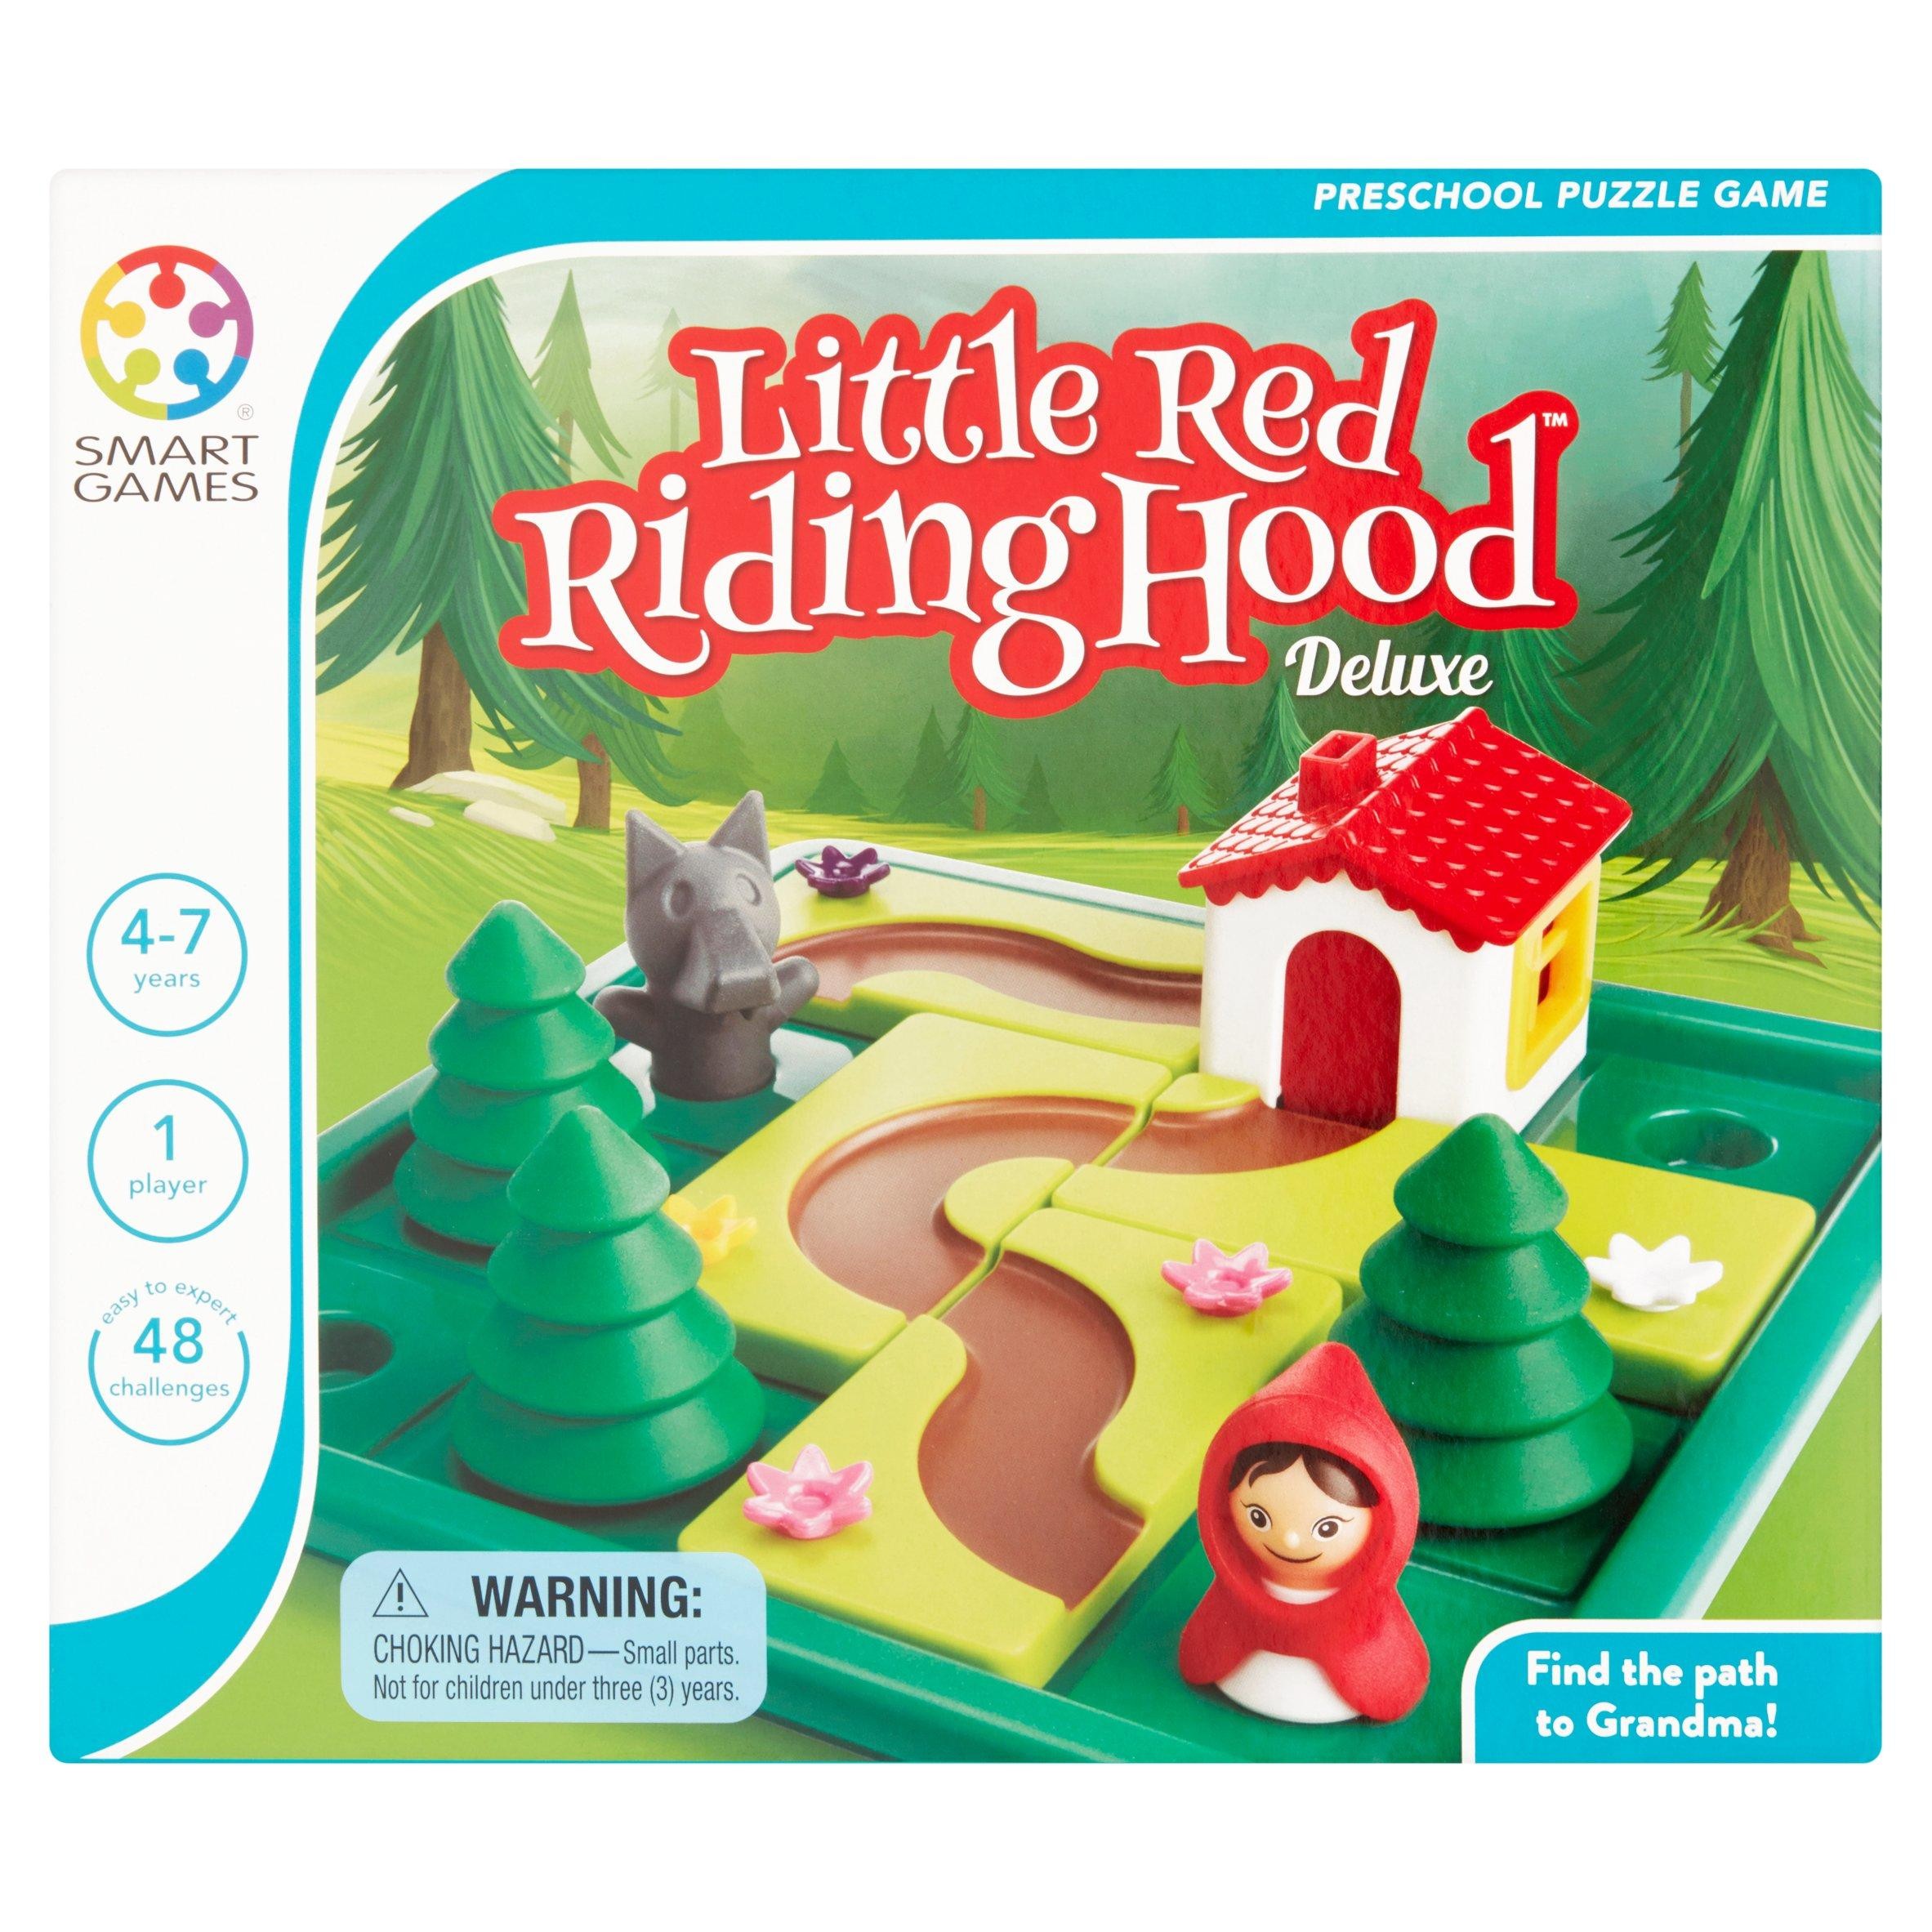 Little Red Riding Hood Deluxe Preschool Puzzle Game